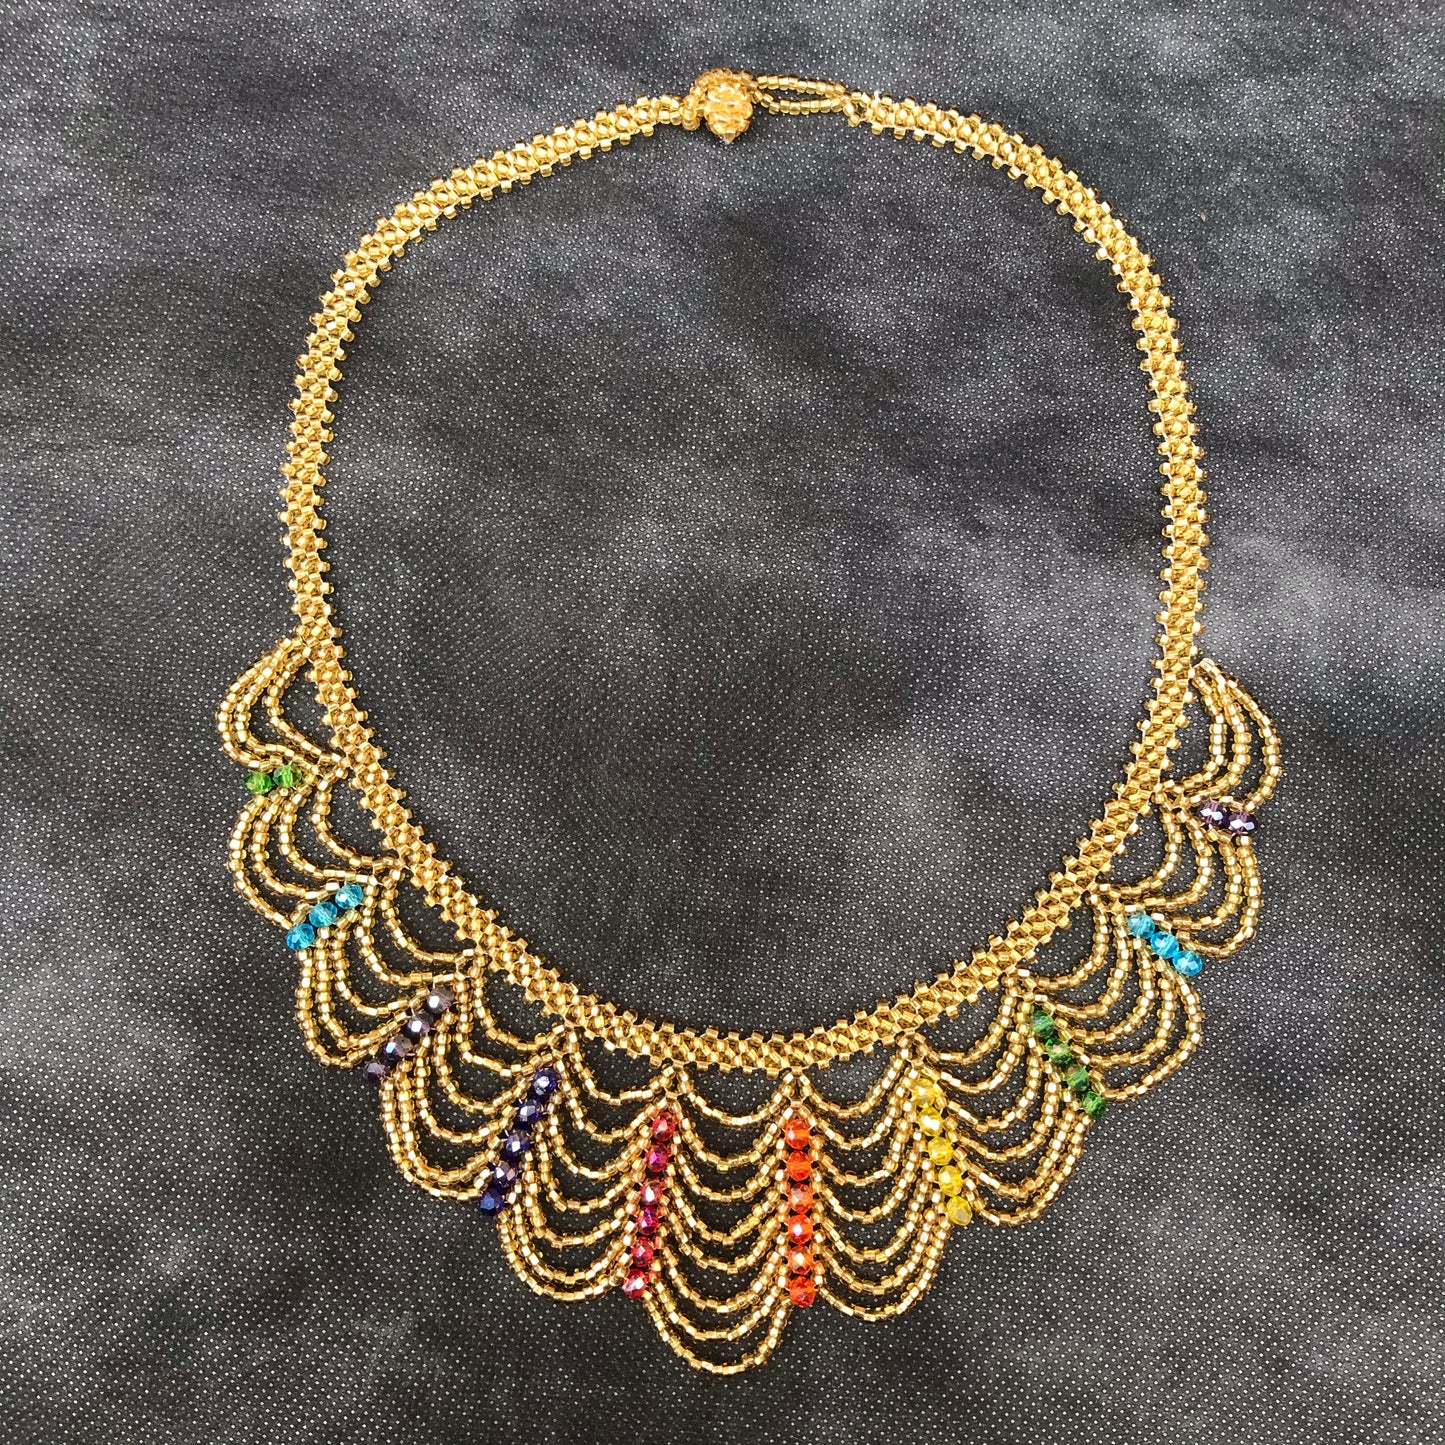 Drapery Necklace in Gold and Rainbow